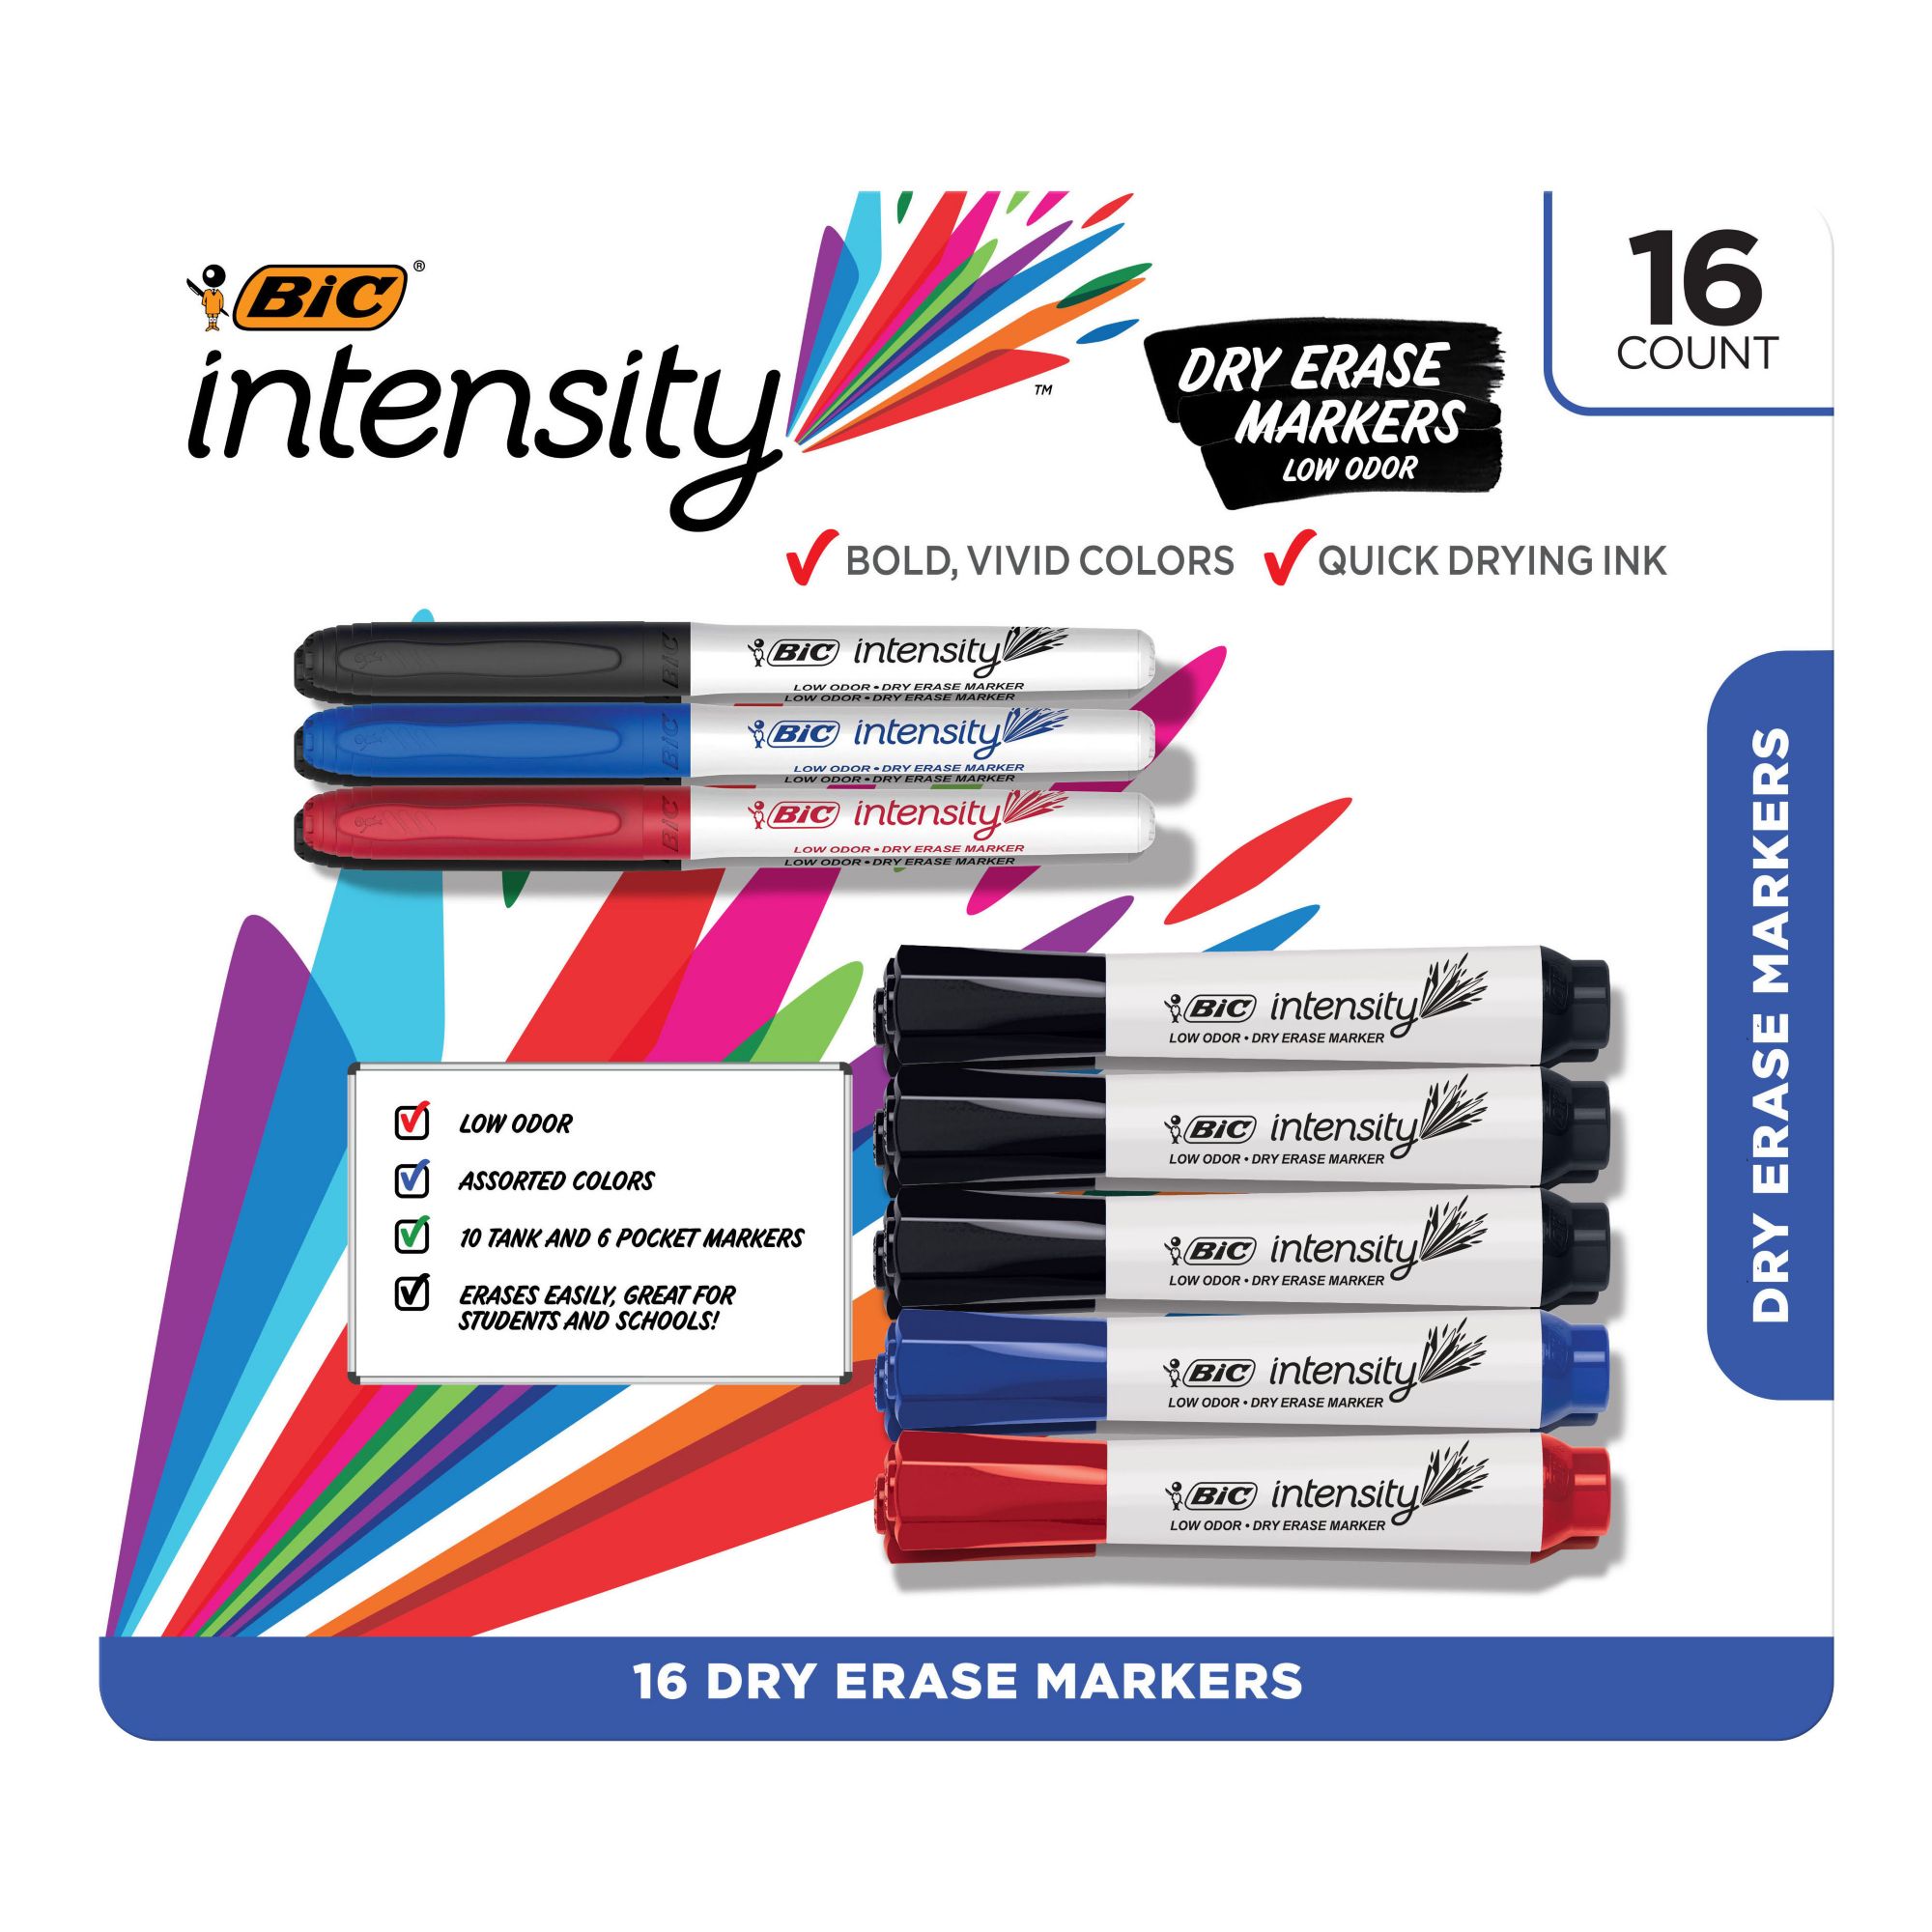 Bic, Intensity Marker Pens, Fine Point, Assorted Colors, Pack of 6